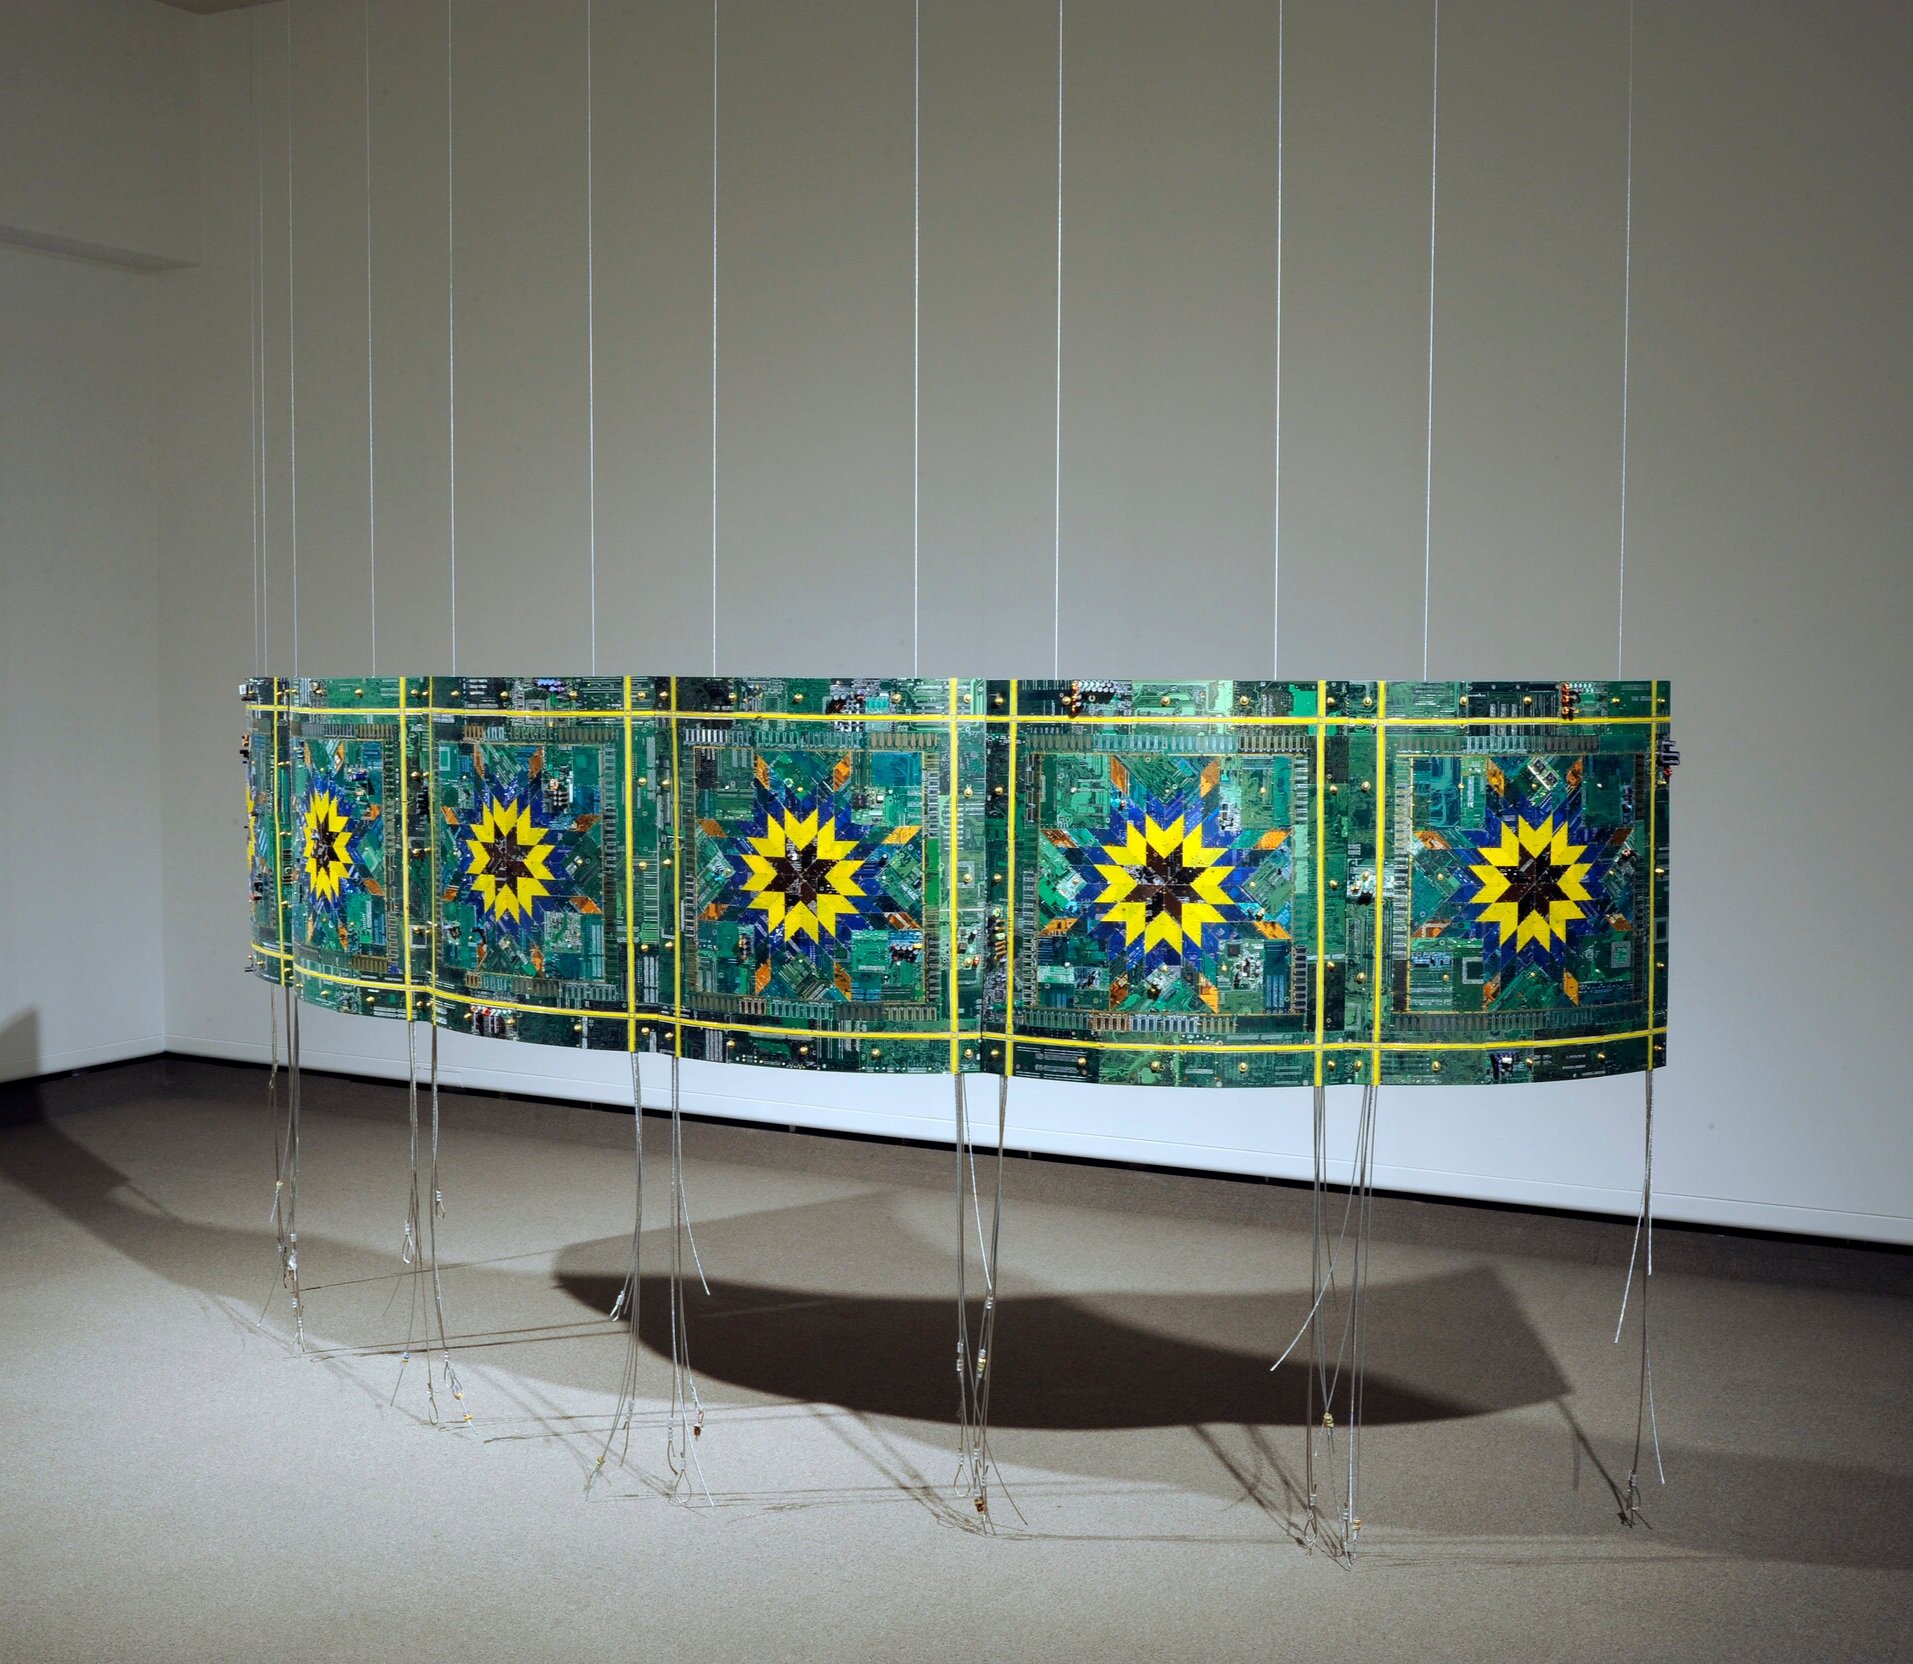   Shield Wall , 2008, Computer circuit boards, plexiglass, copper wire, enamel paint and recycled materials, 155 x 193 x 86 cm COURTESY OF DON HALL  